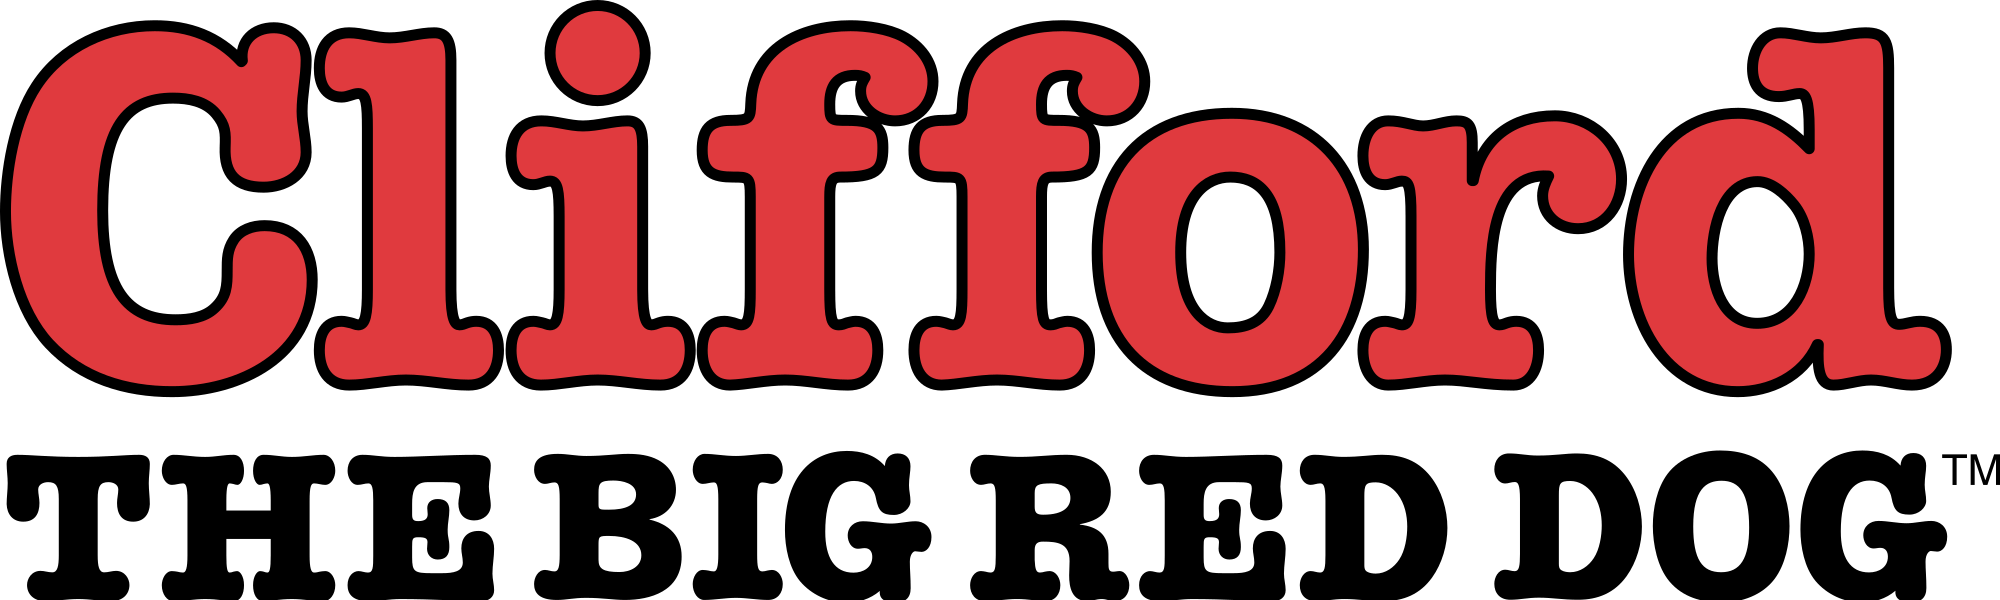 Clifford Logo - File:Clifford the Big Red Dog logo.svg - Wikimedia Commons